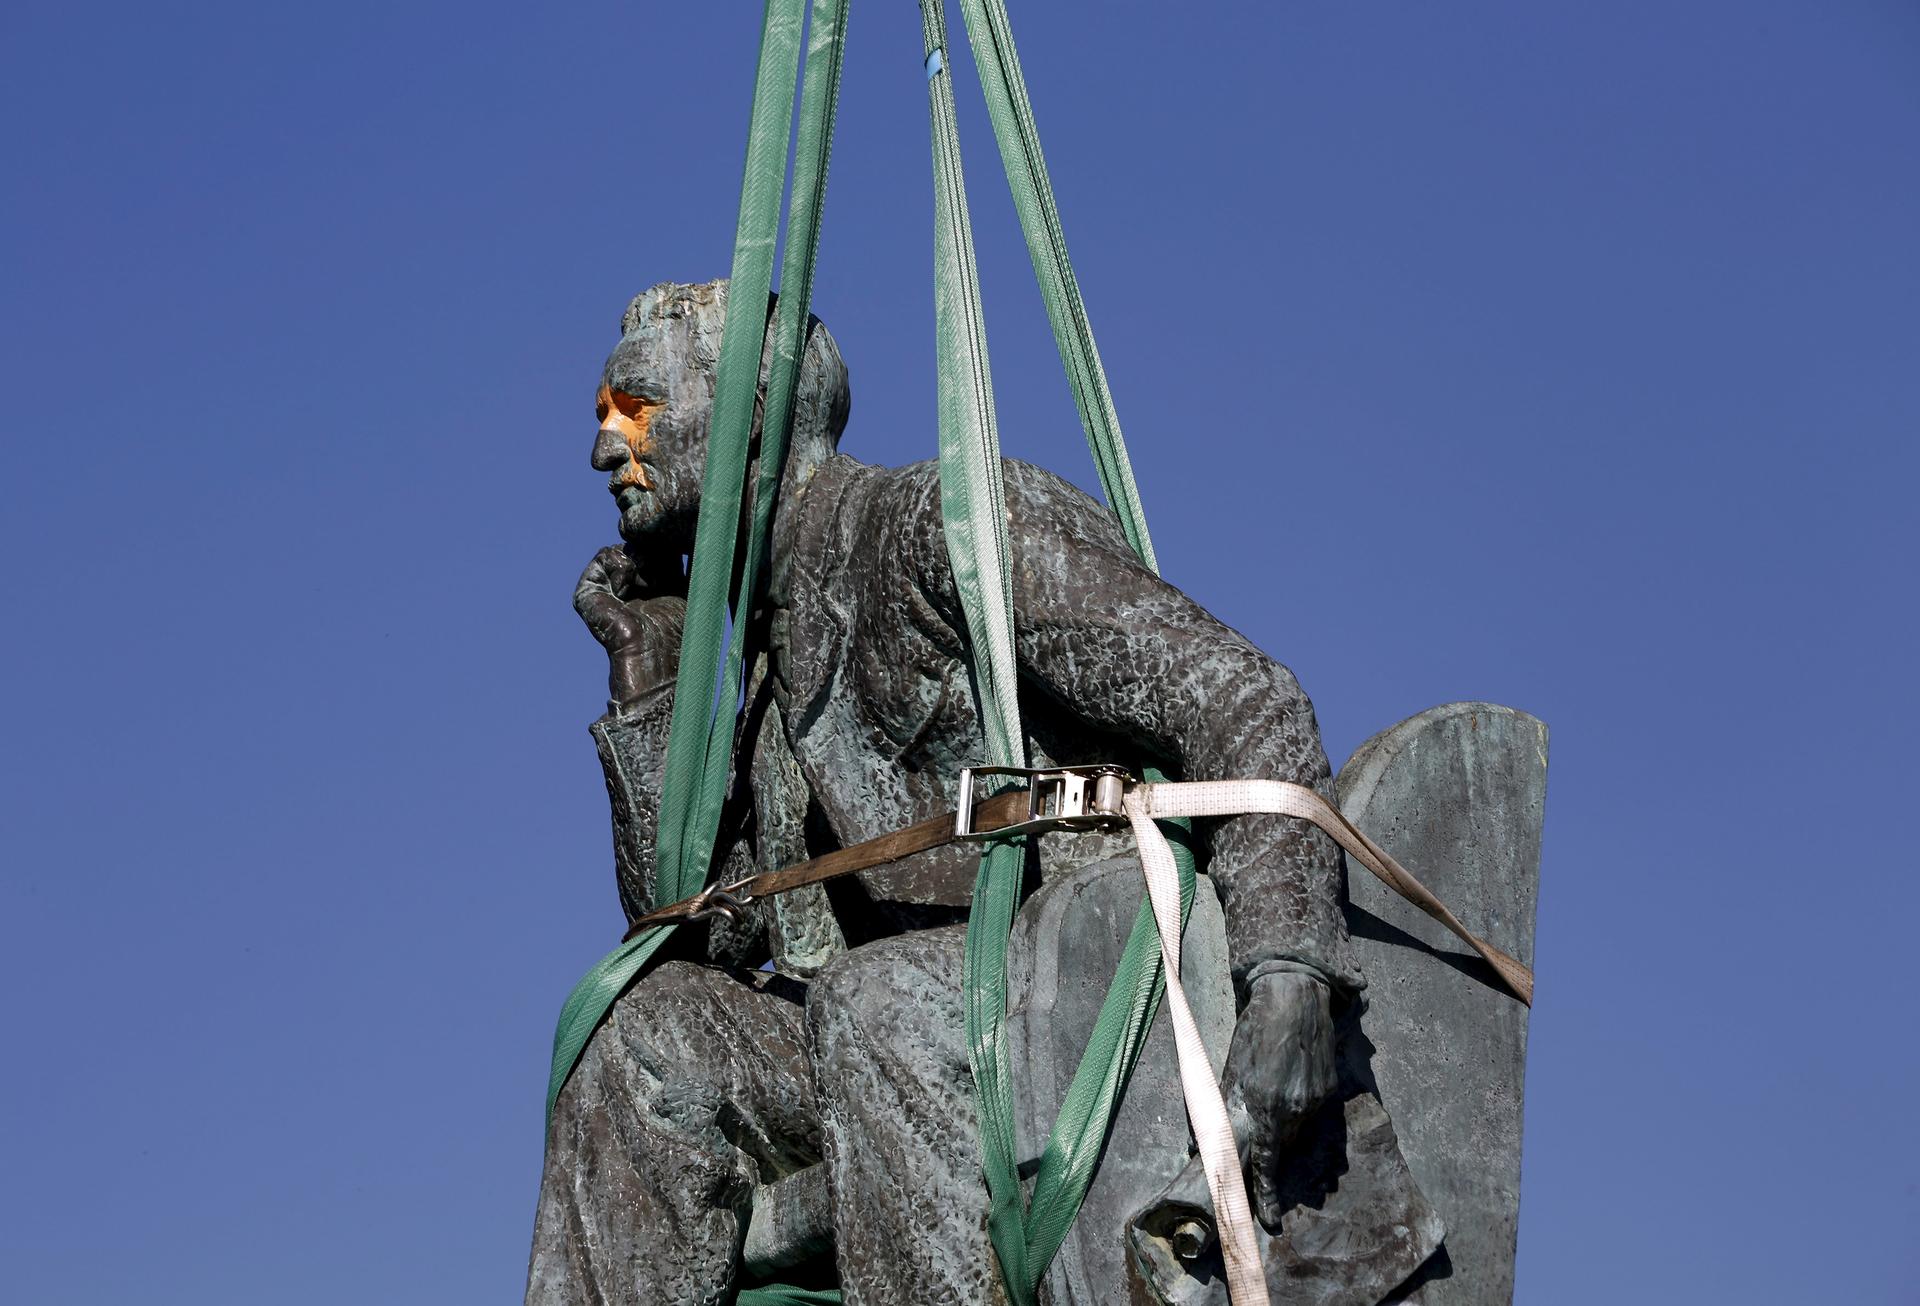 The statue of Cecil John Rhodes is bound by straps as it awaits removal from the University of Cape Town (UCT), April 9, 2015. UCT's Council voted on Wednesday to remove of the statue of the former Cape Colony governor, after protests by students